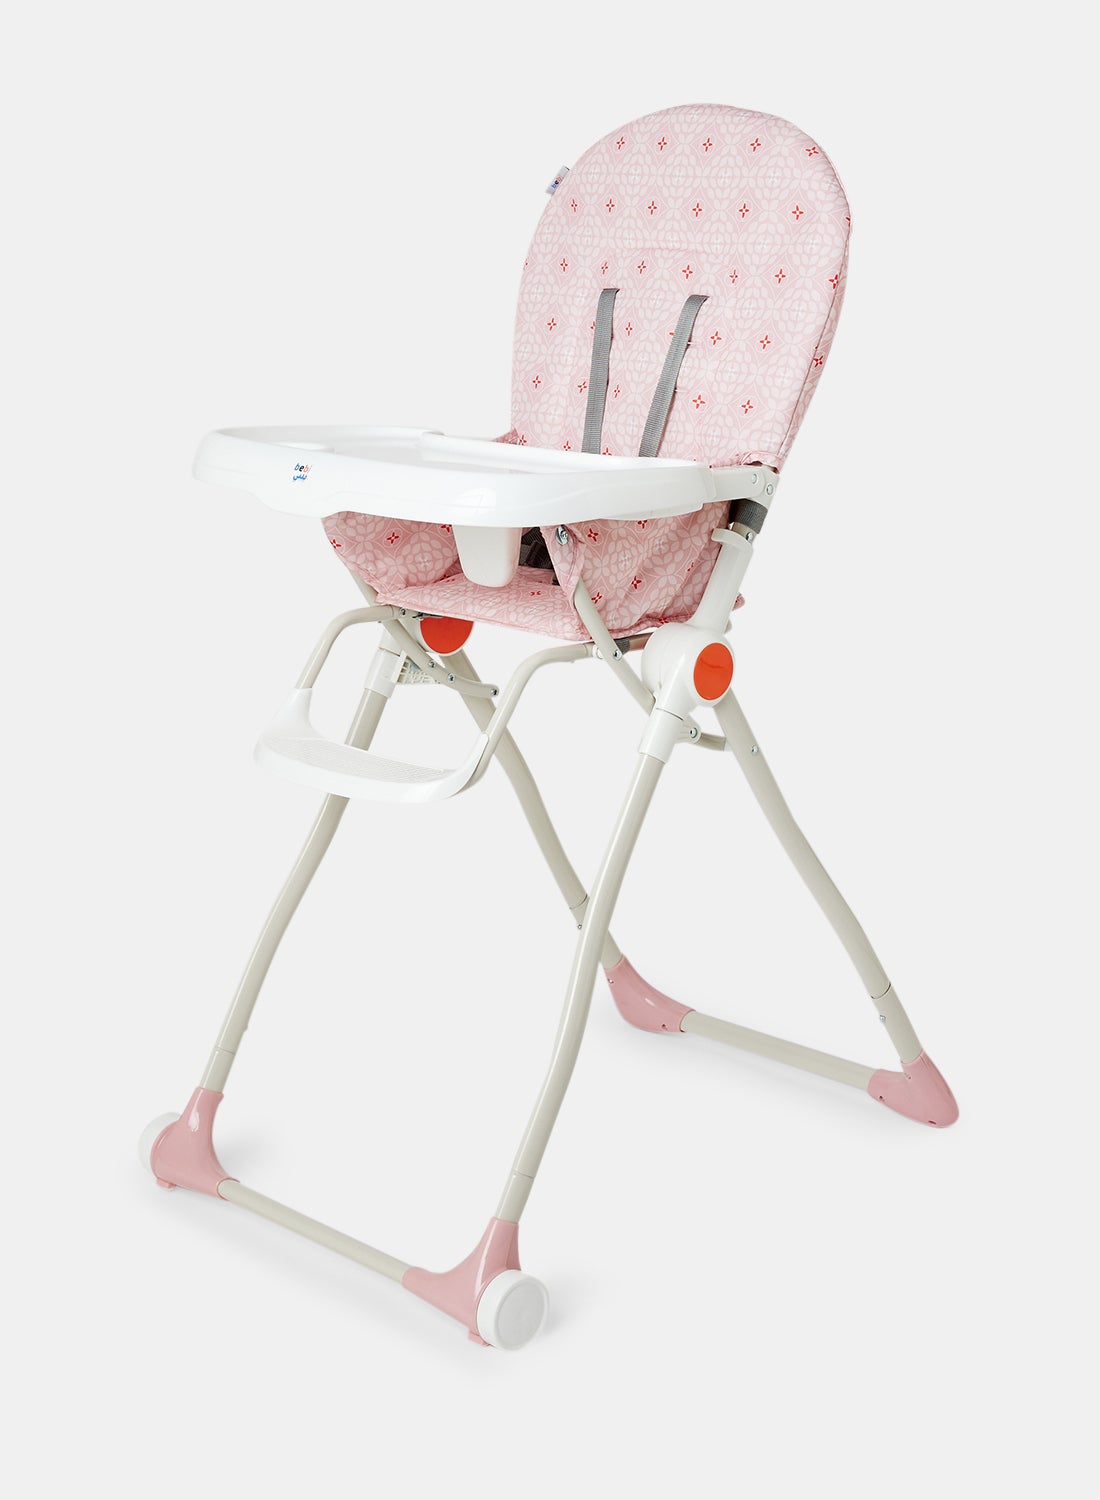 Foldable Baby Feeding High Chair Lightweight And Foldable With Multiple Recline Modes Suitable For Babies For 6 Months To 3 Years Rose 